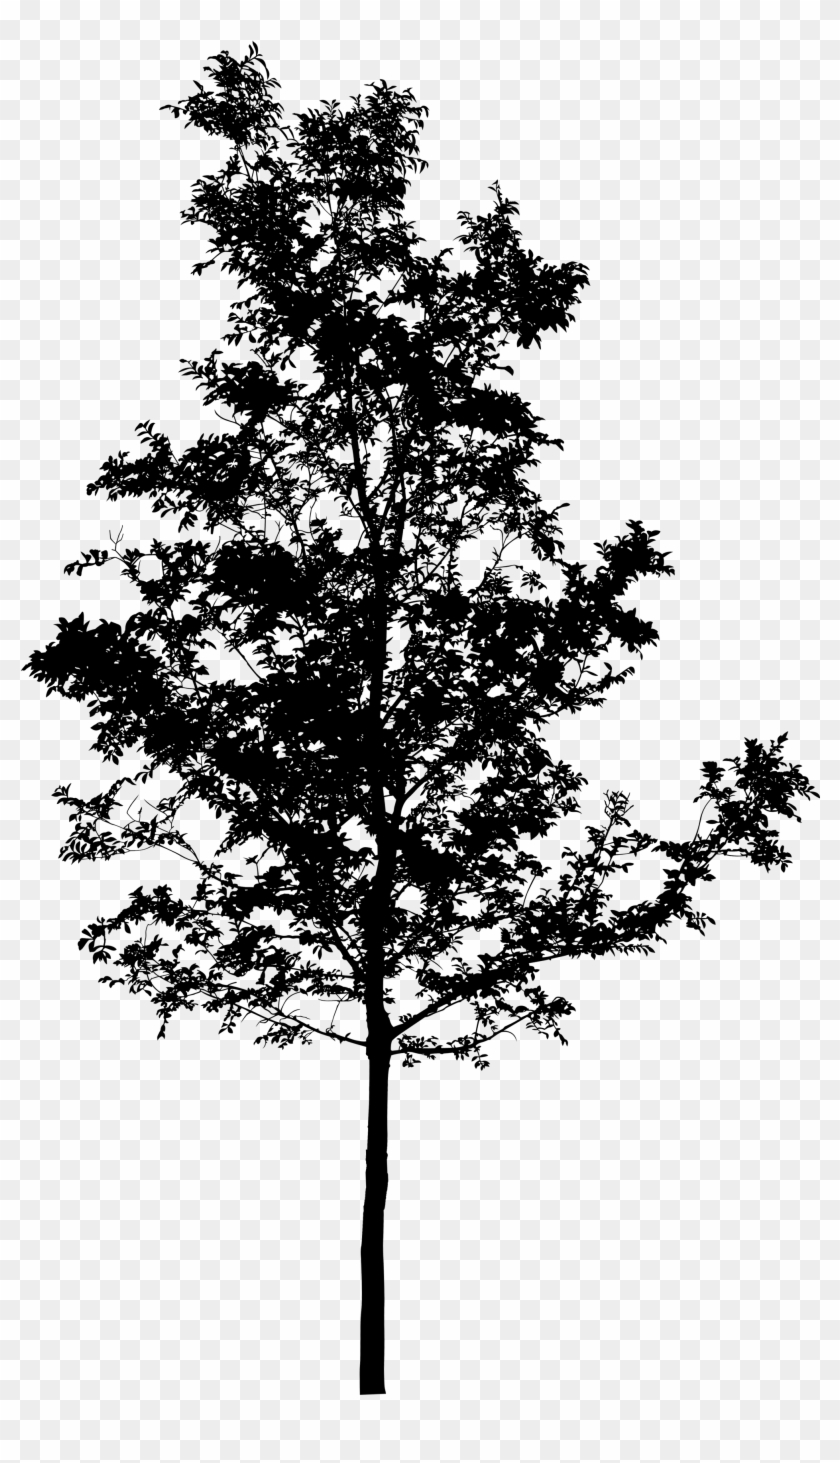 Tree Sillhouettes - Transparent Background Pine Tree Png Clipart #967098